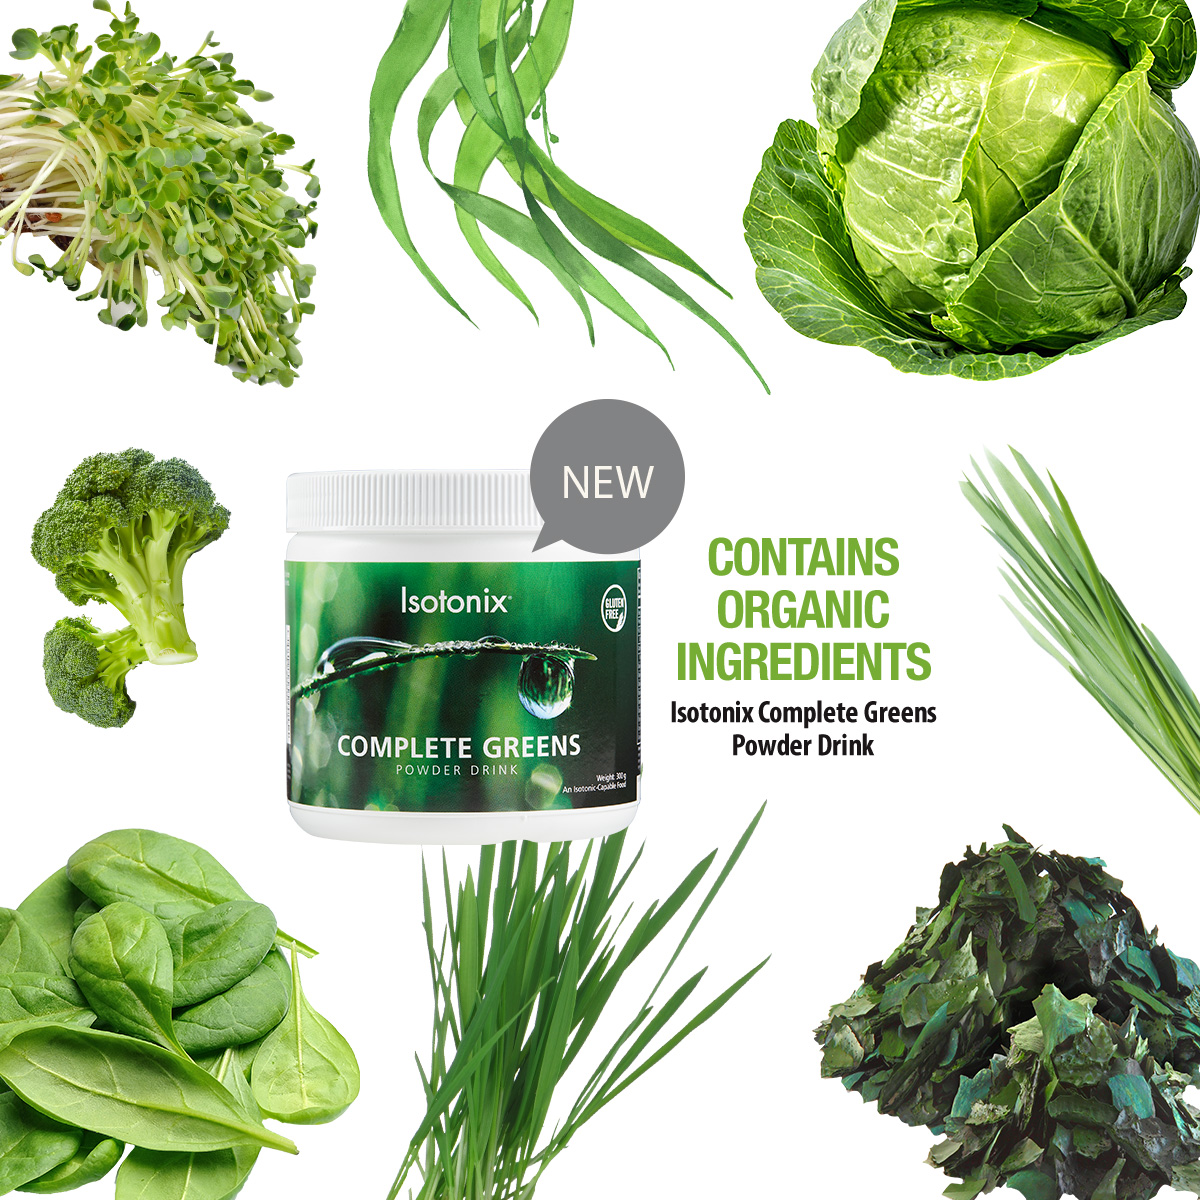 Why Choose Isotonix® Complete Greens?